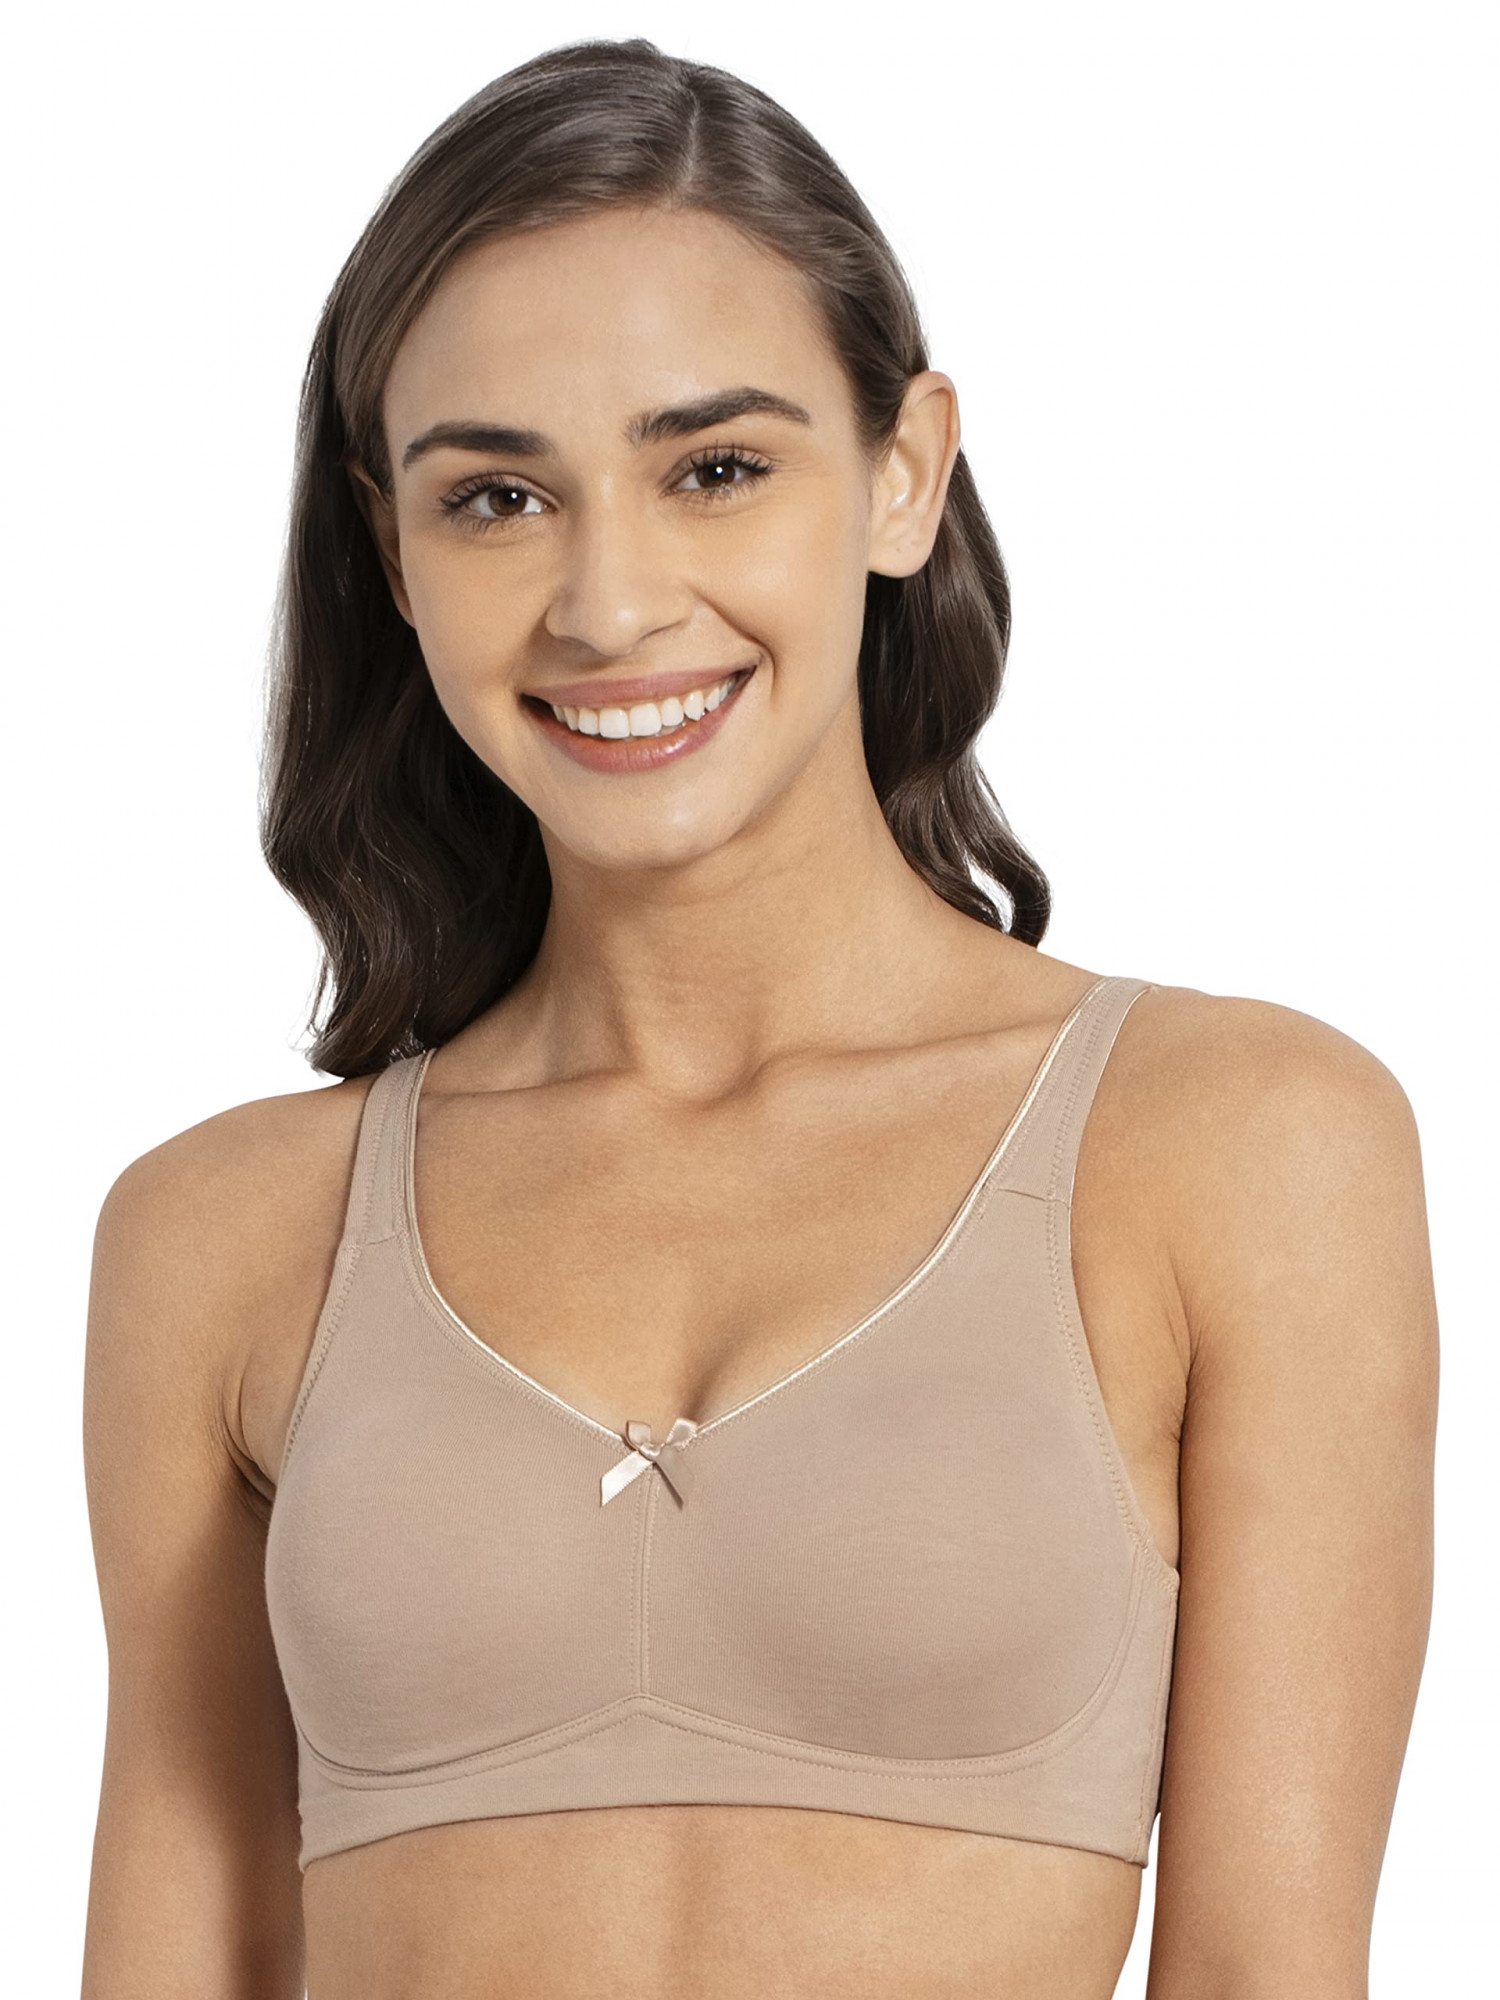 Enamor A039 Everyday Stretchable Cotton T-Shirt Bra for Women - Padded,  Non-Wired & Medium Coverage